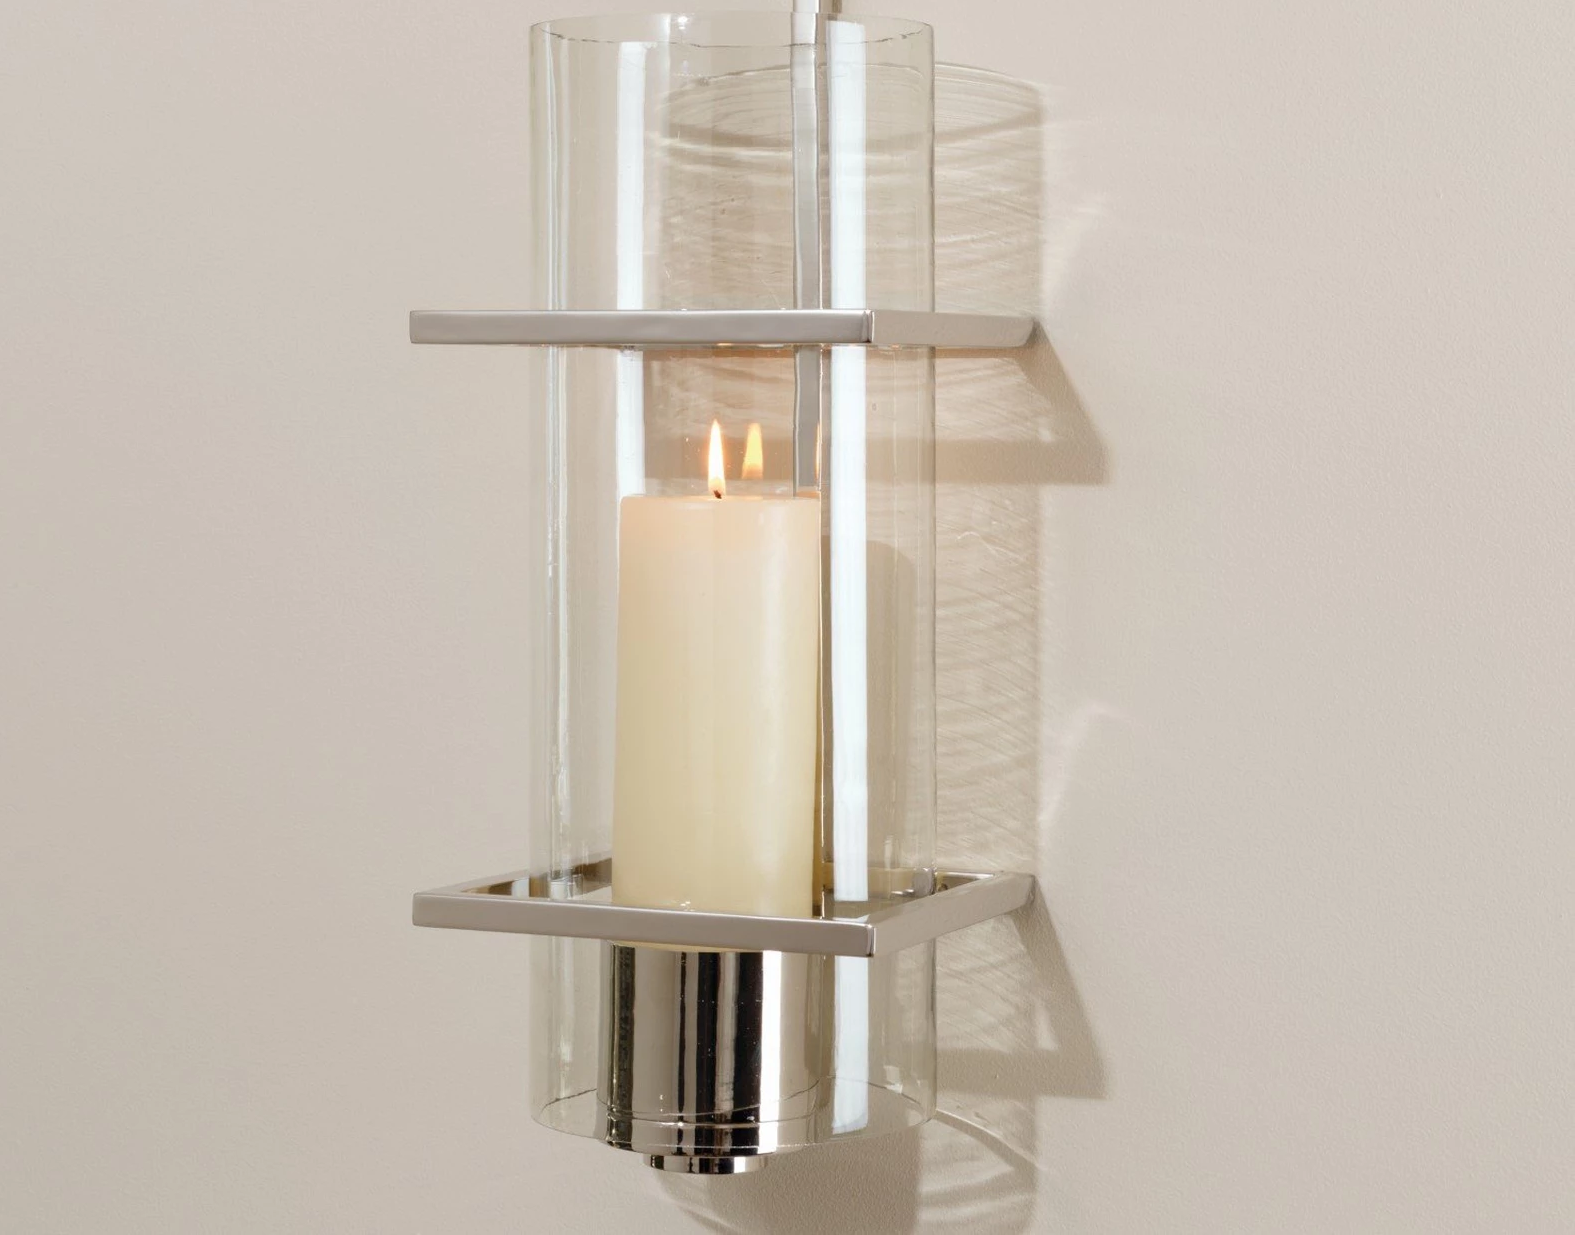 Accessorize Your Home With These Decorative Candles